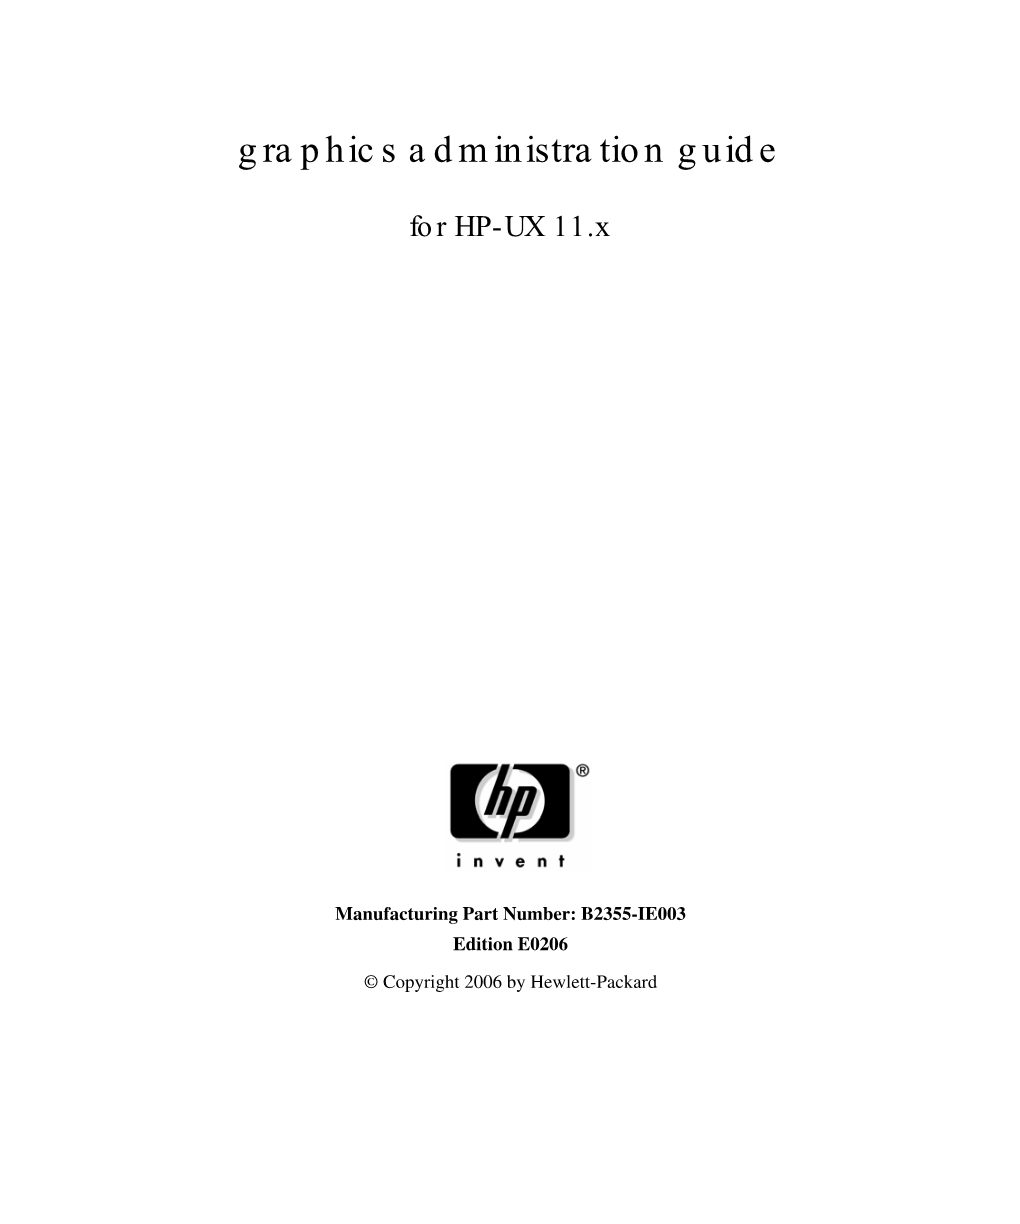 Graphics Administration Guide for HP-UX 11.X